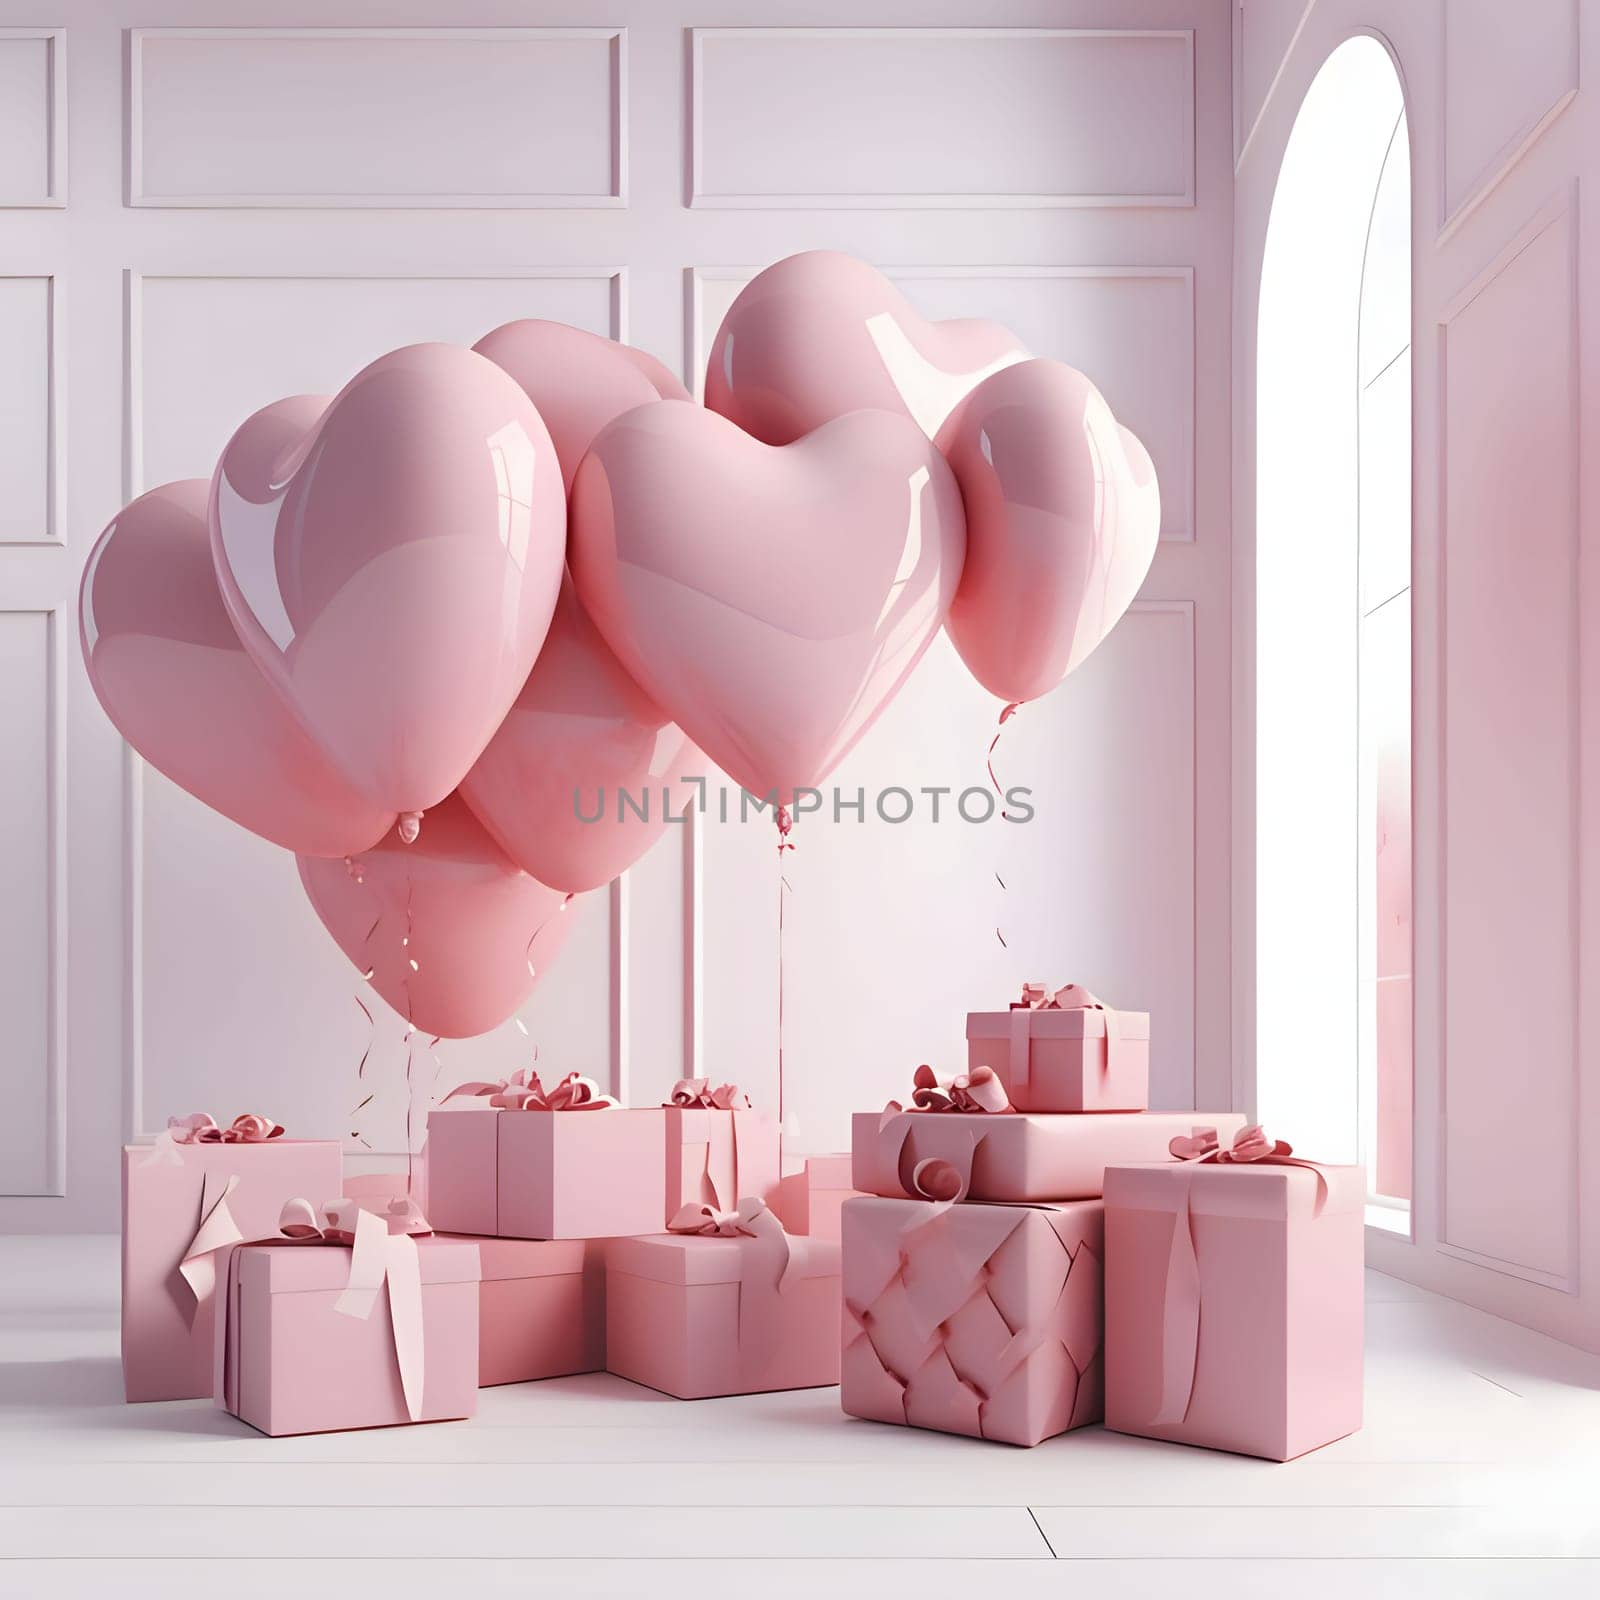 Gifts with pink bows around pink and white hearts and heart-shaped balloons. Heart as a symbol of affection and love. The time of falling in love and love.